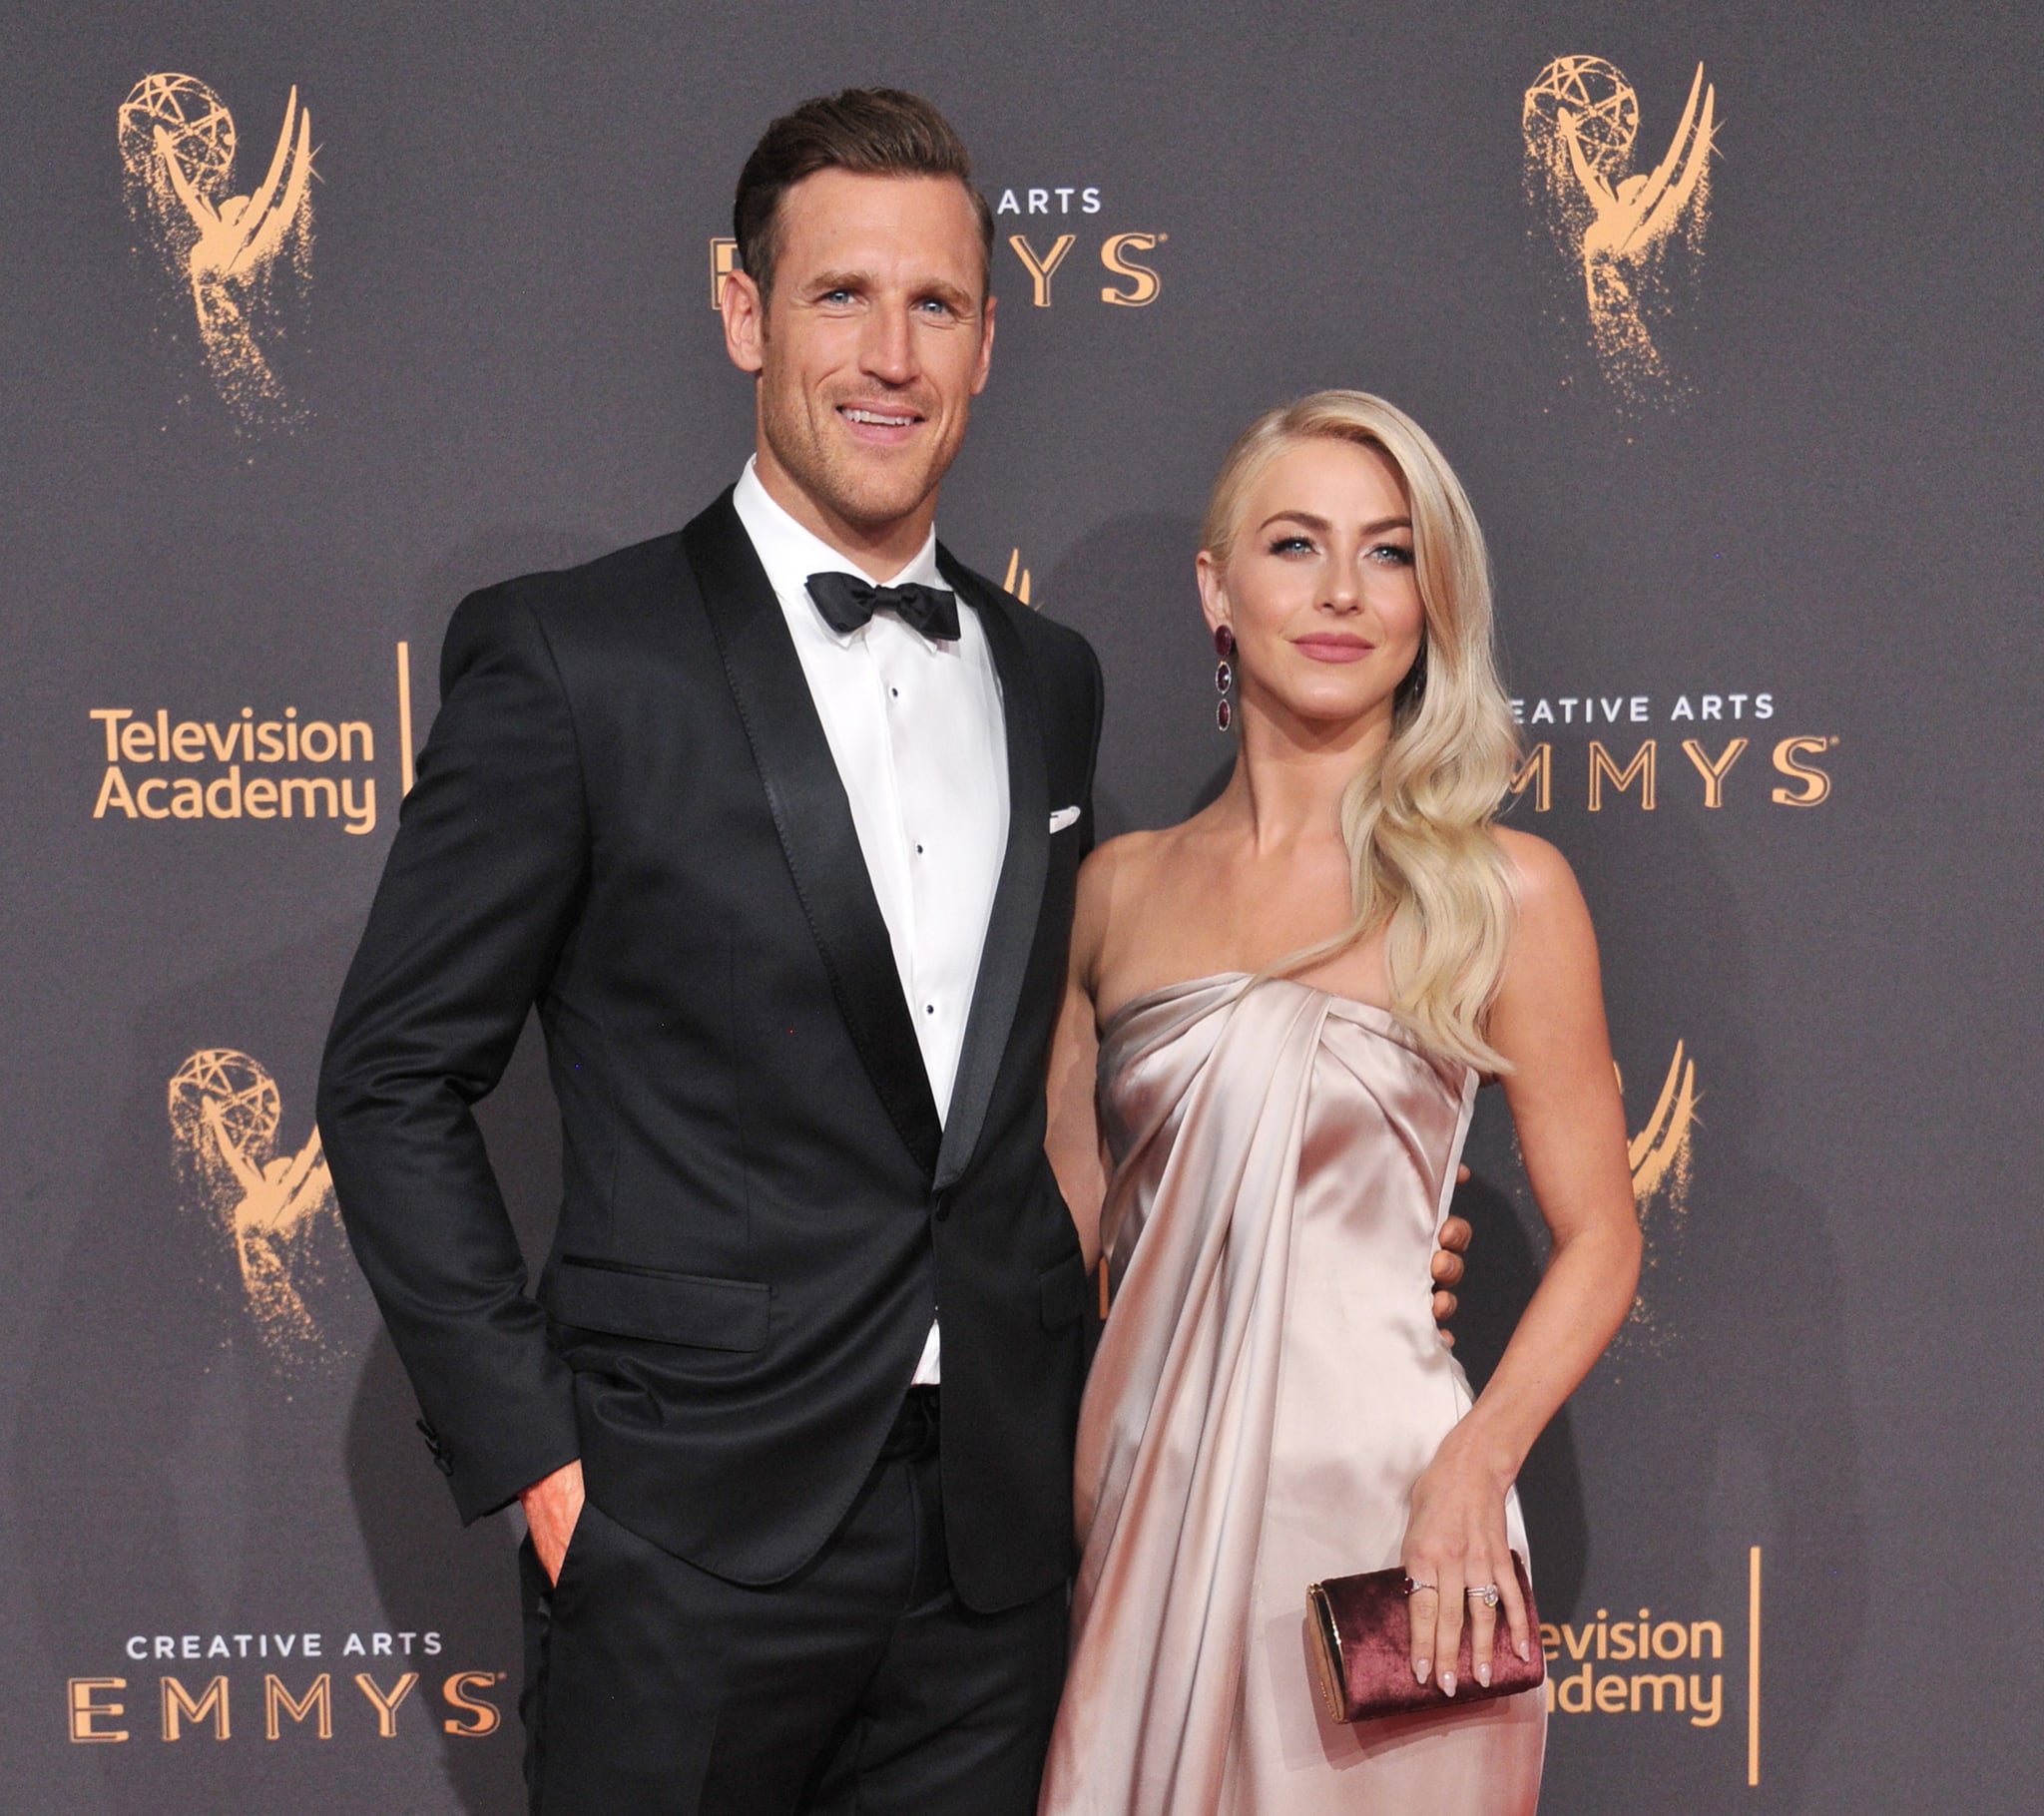 LOS ANGELES, CA - SEPTEMBER 09:  Julianne Hough and Brooks Laich arrive at the 2017 Creative Arts Emmy Awards - Day 1 at Microsoft Theater on September 9, 2017 in Los Angeles, California.  (Photo by Gregg DeGuire/WireImage)